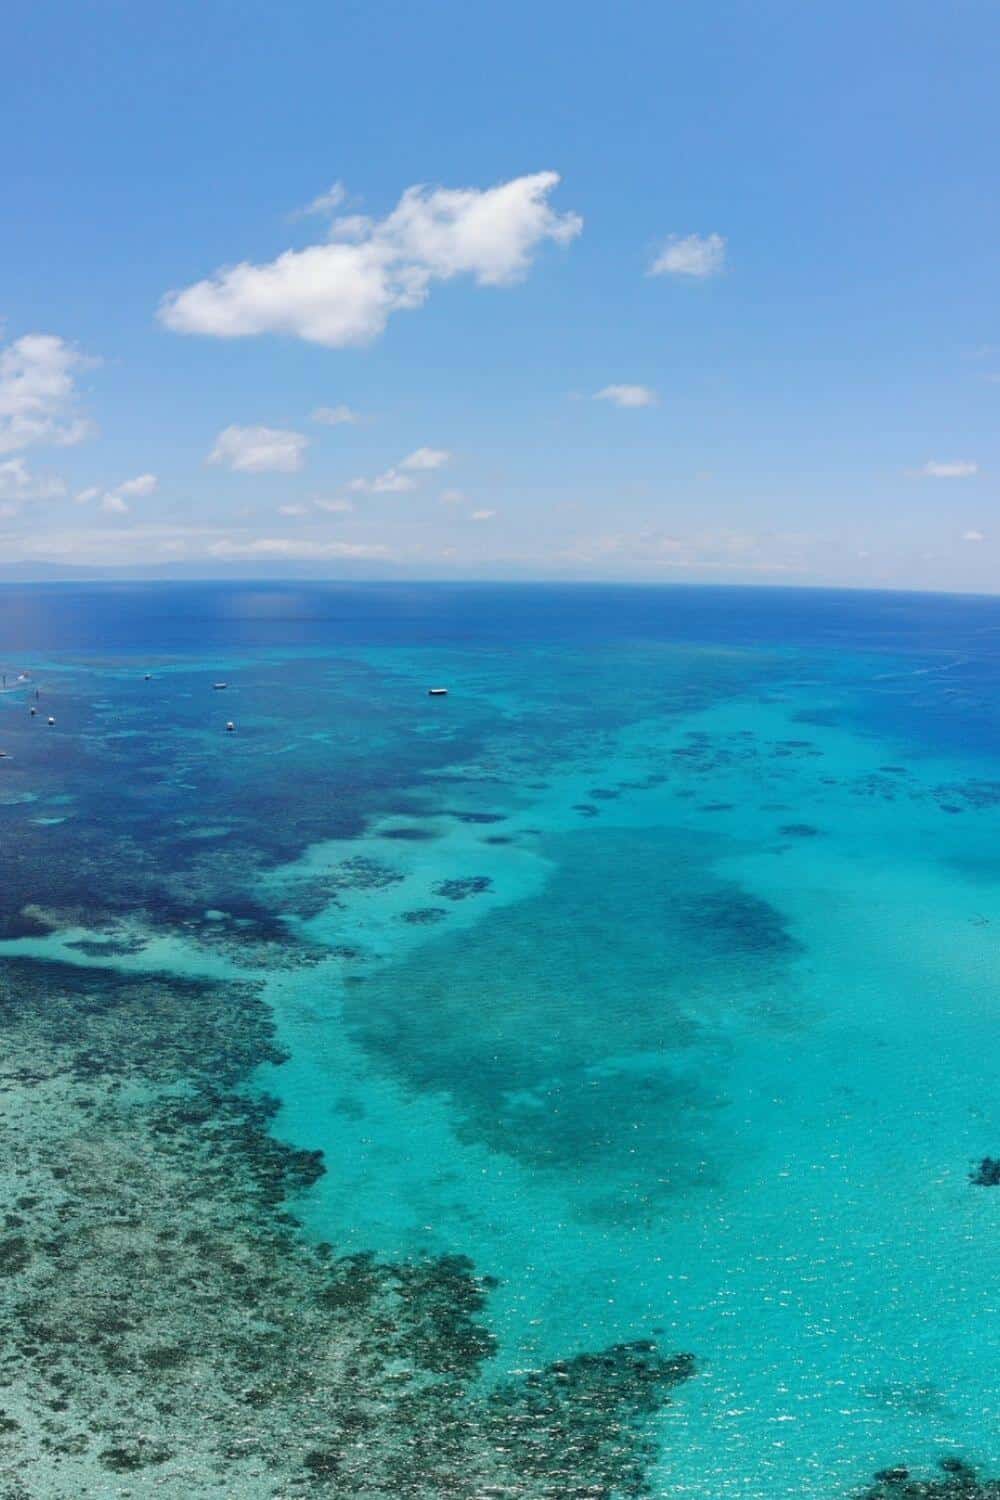 Helicopter ride view over the Great Barrier Reef